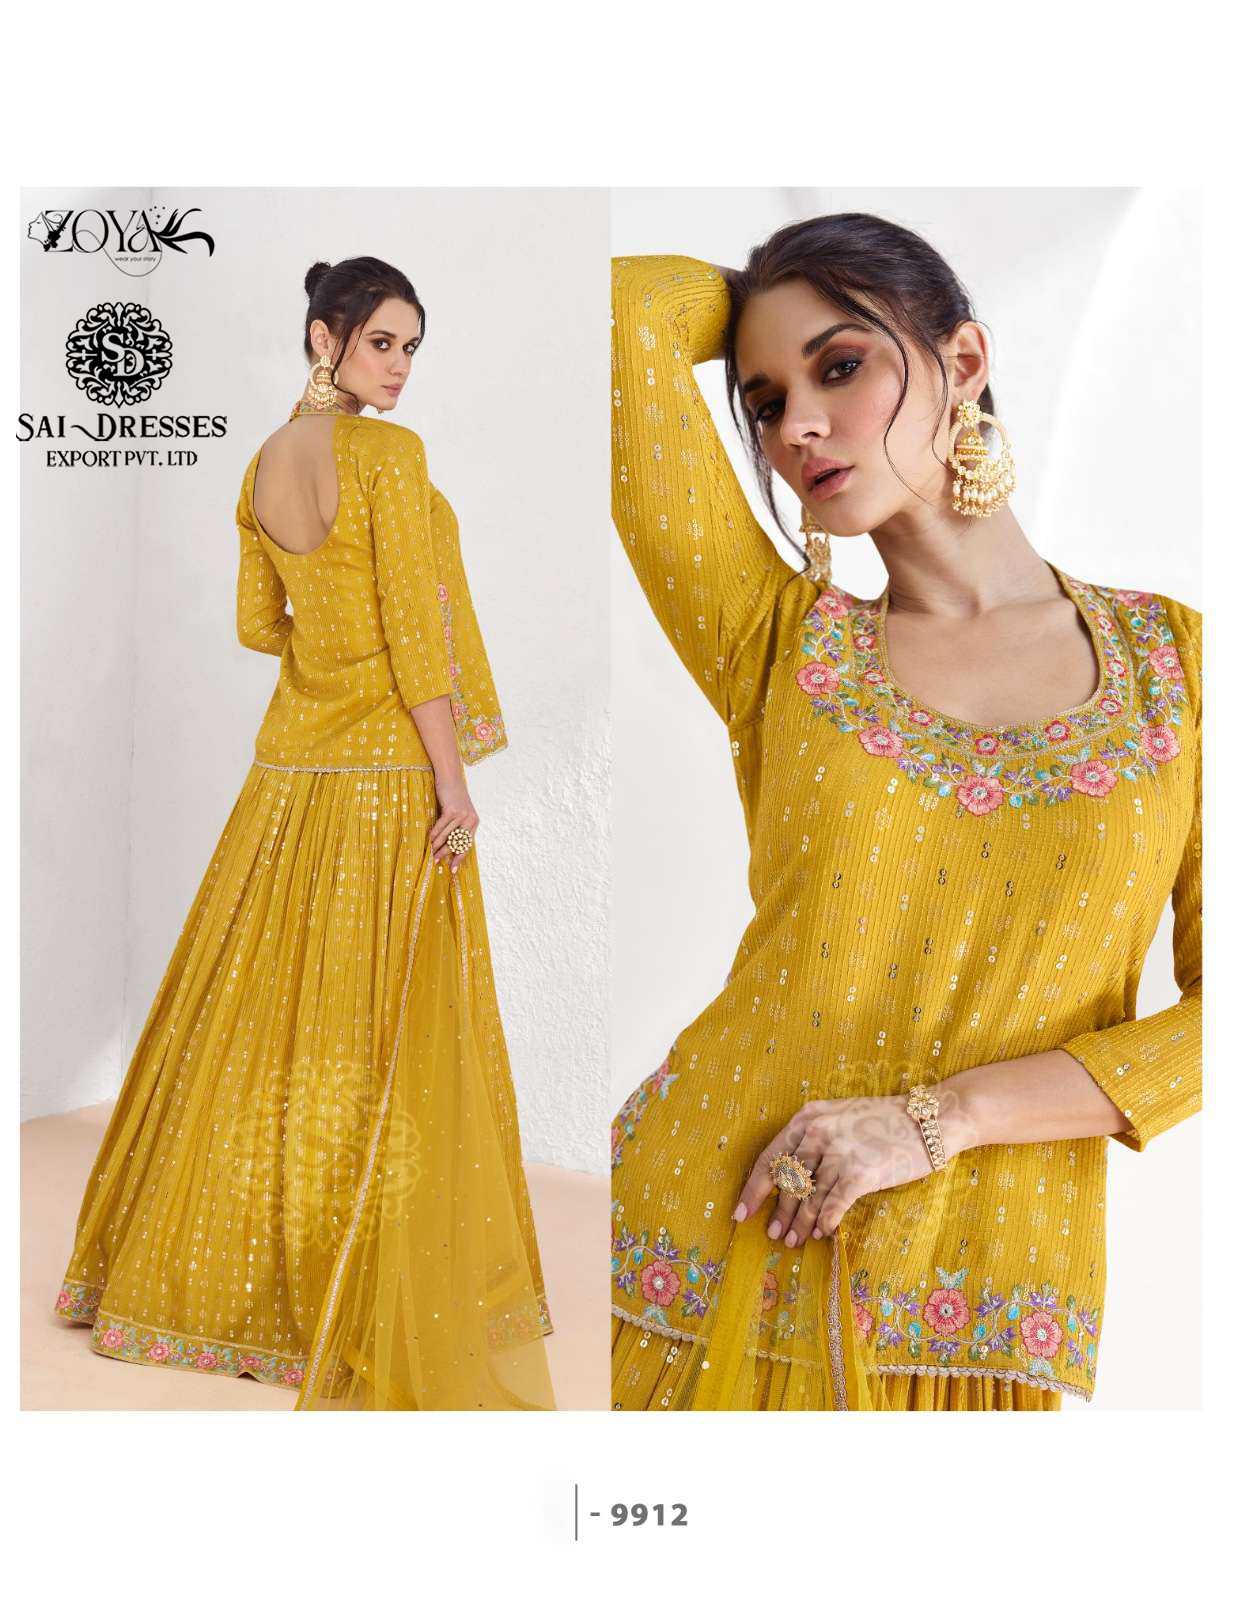  AARZOO READY TO FESTIVE WEAR DESIGNER 3 PIECE SUITS IN WHOLESALE RATE IN SURAT